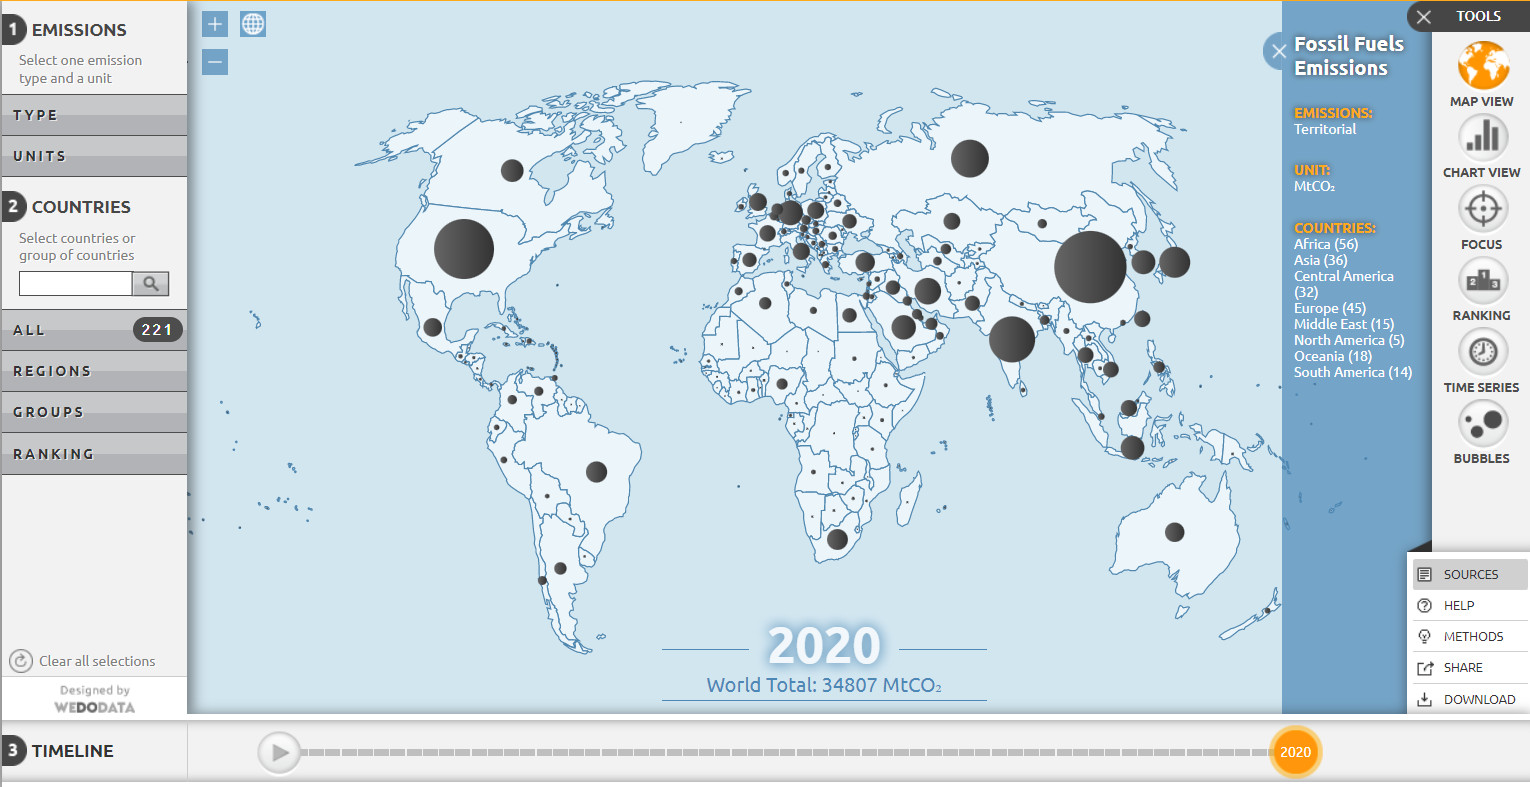 Screenshot from Global Carbon Atlas: a world map showing CO2 emissions for every country in 2020, the world total being 34807 MtCO2